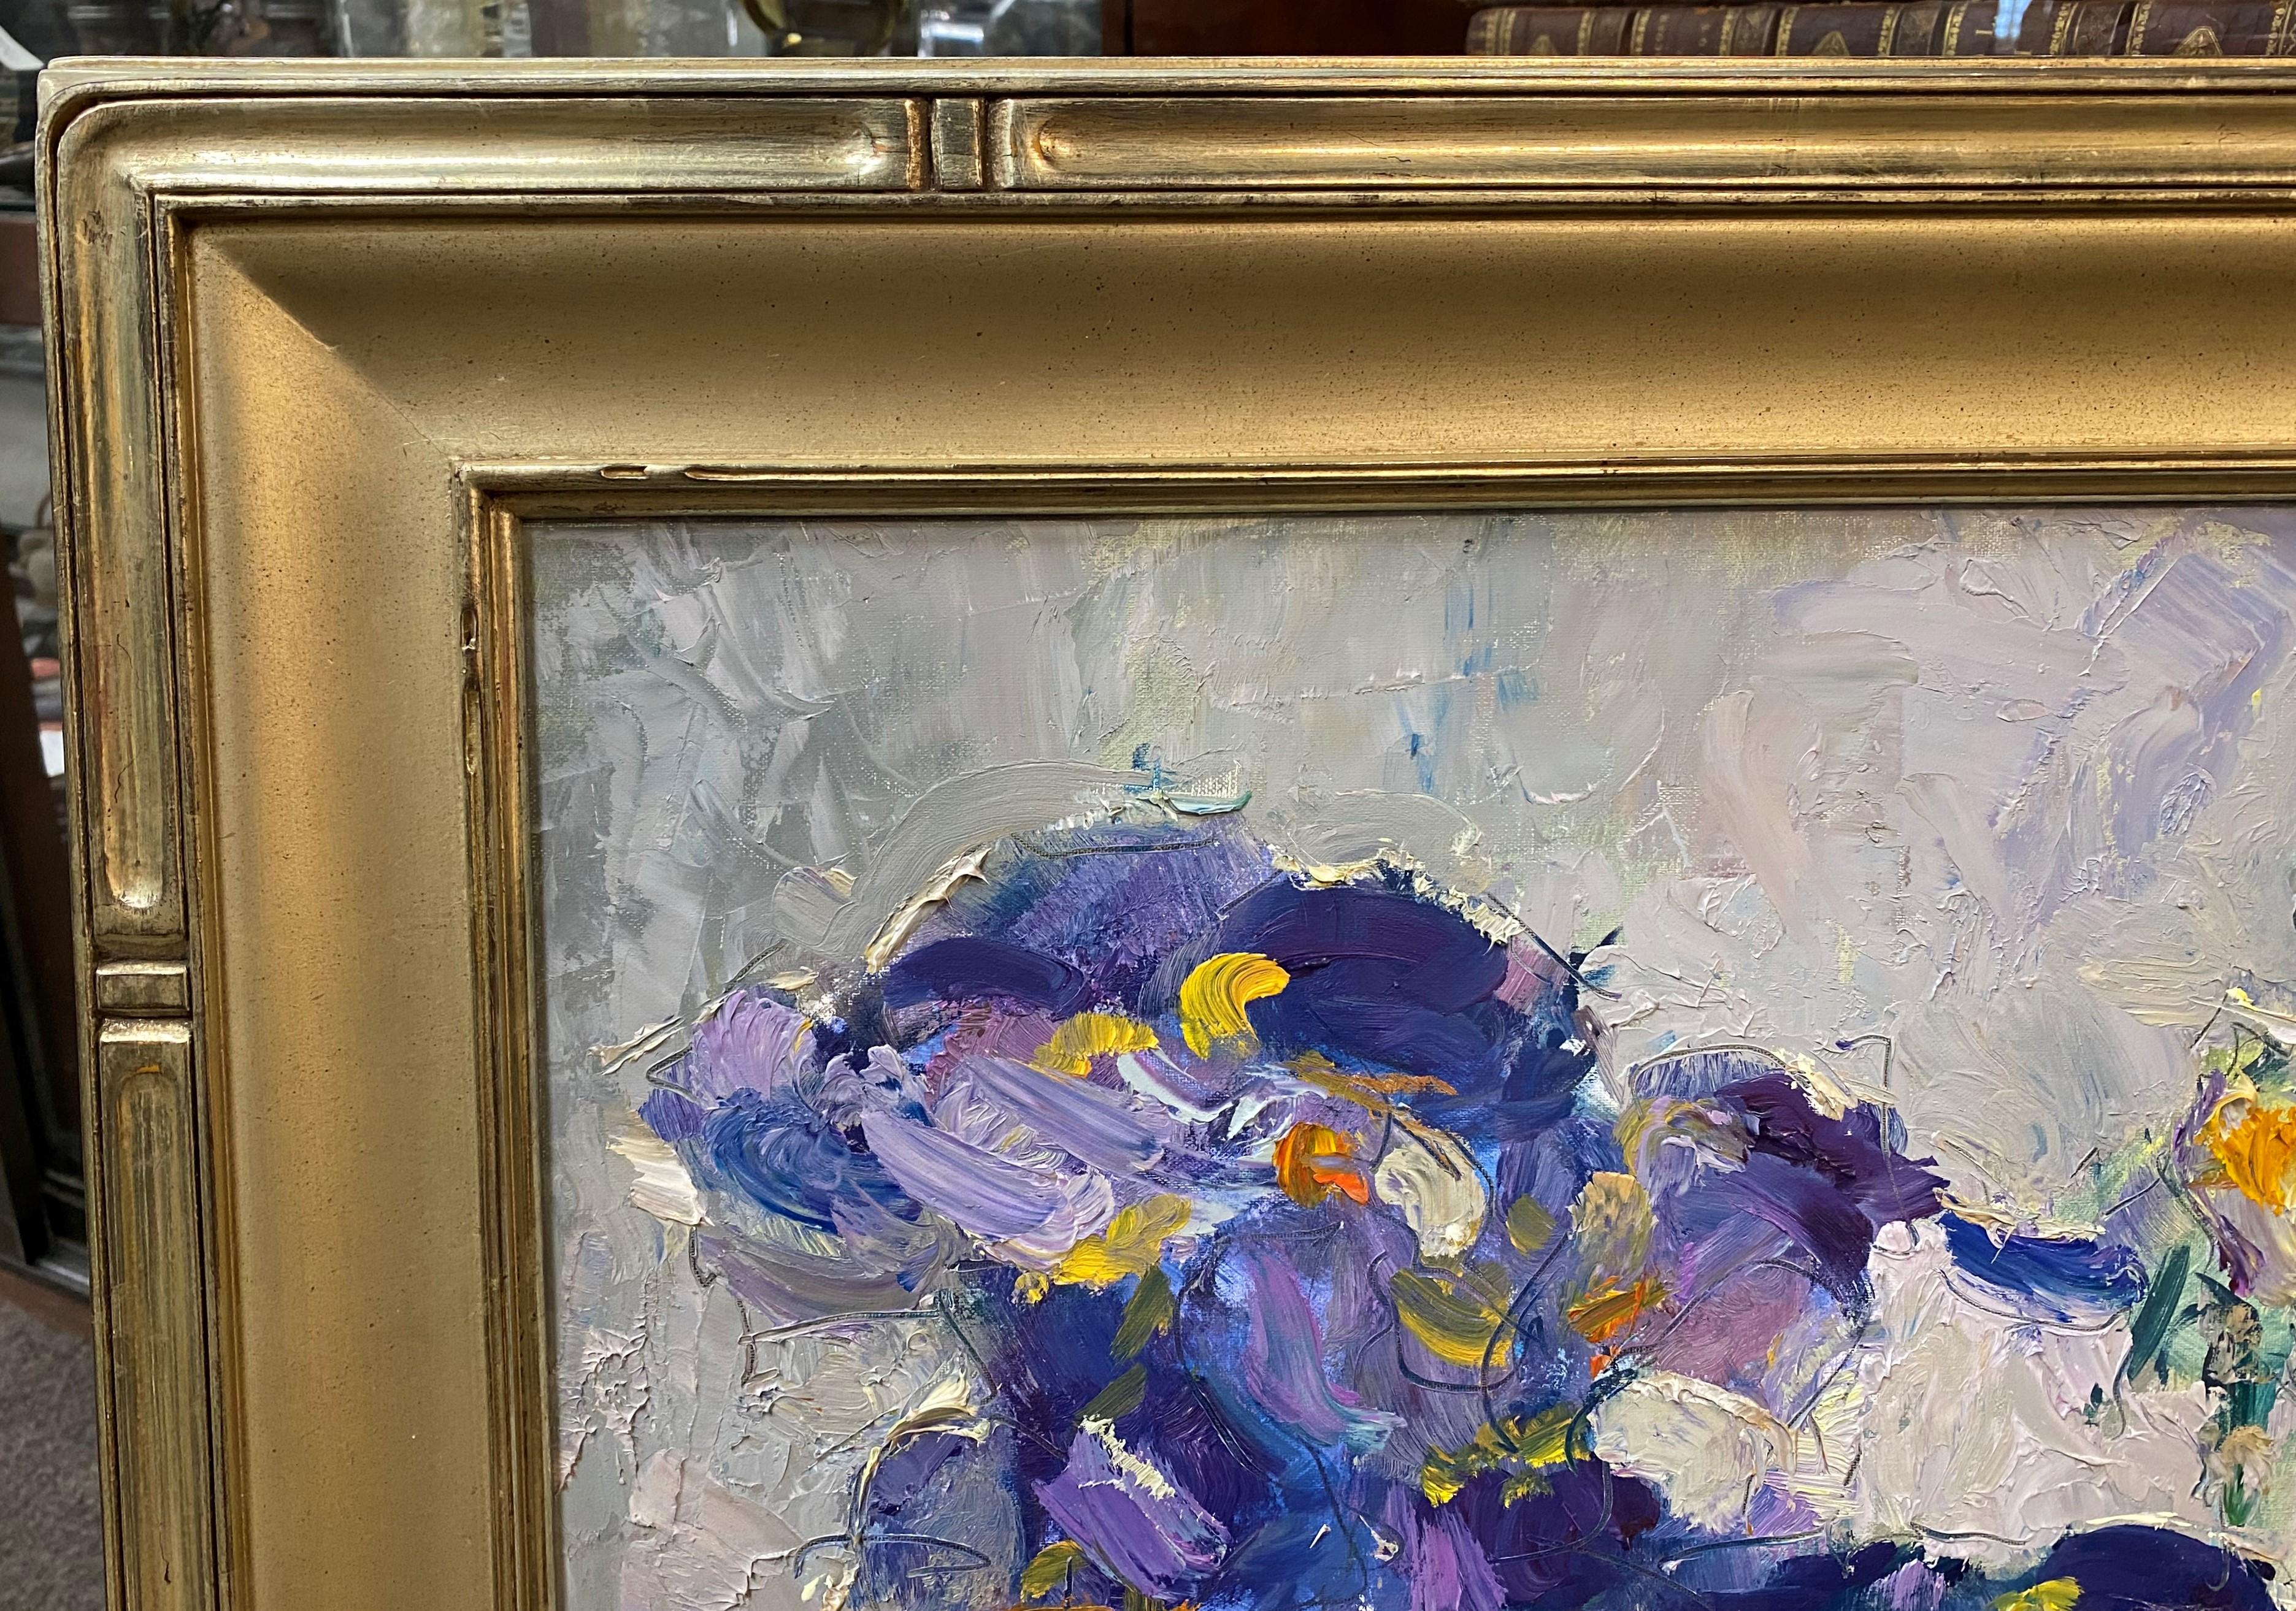 Irises in a Glass Vase - American Impressionist Painting by Stephen Motyka